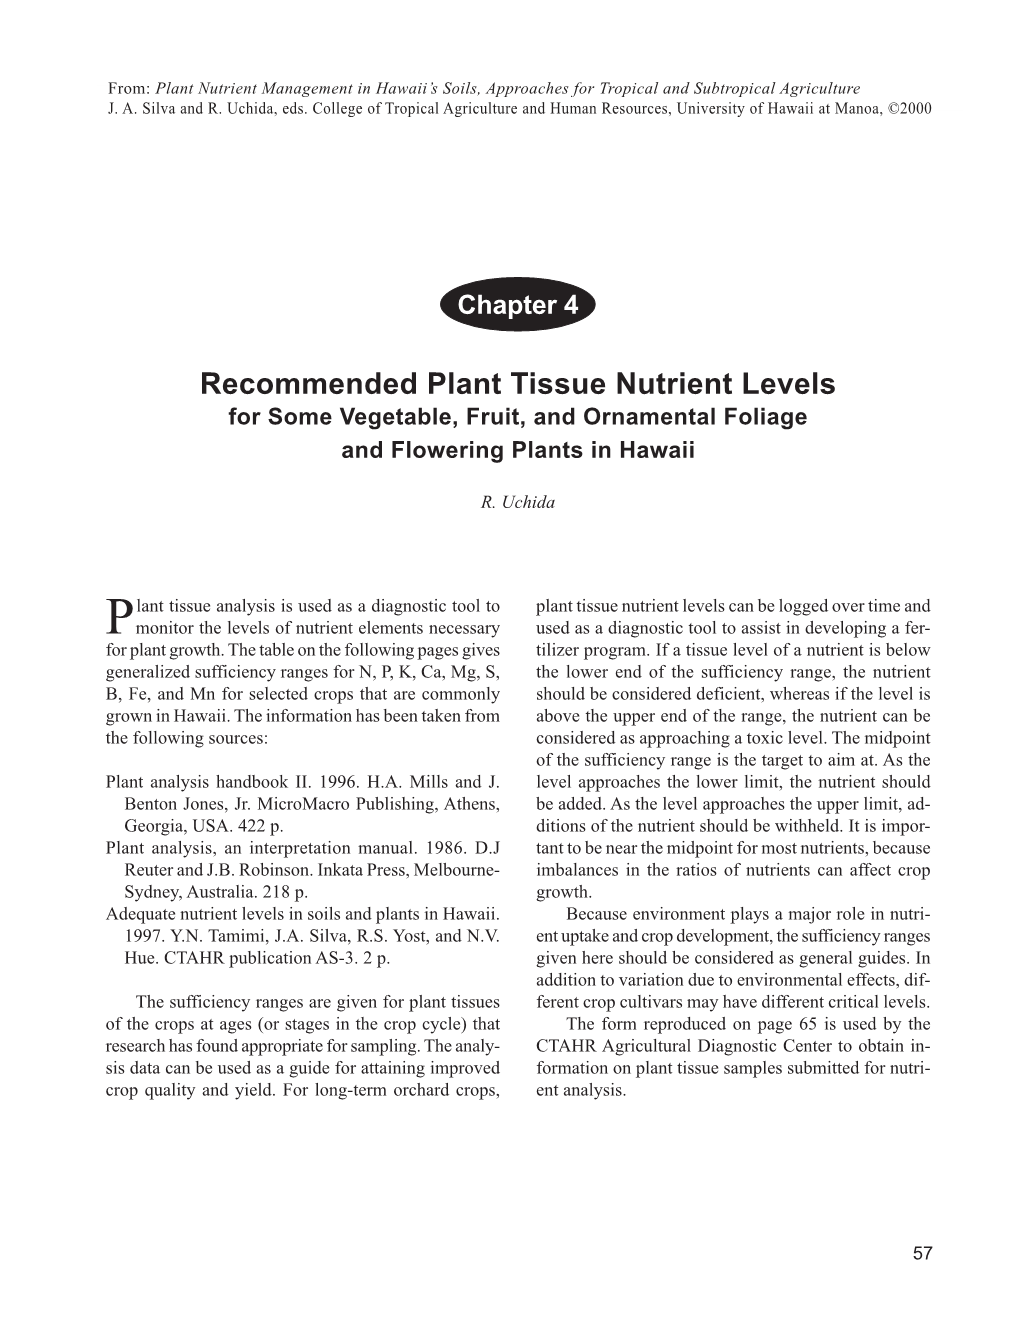 Recommended Plant Tissue Nutrient Levels for Some Vegetable, Fruit, and Ornamental Foliage and Flowering Plants in Hawaii